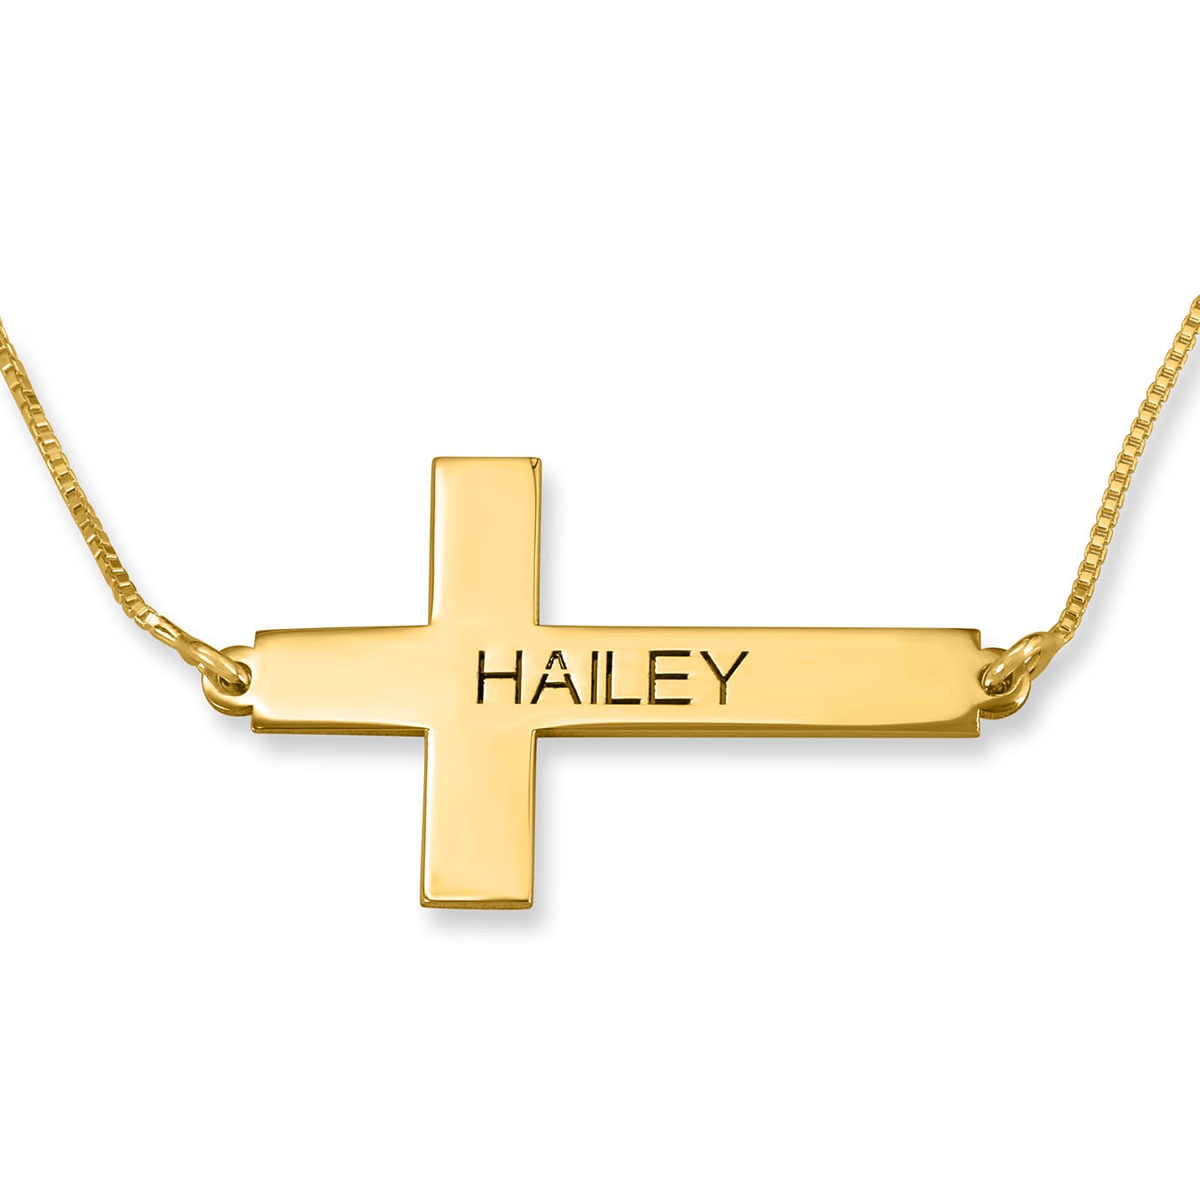 24K Gold Plated Jesus Christ Cross Gold Crucifix Pendant With Cuban Chain  Hip Hop Rap Golden Crucifixio Mens Jewelry From Amajewelry, $7.76 |  DHgate.Com